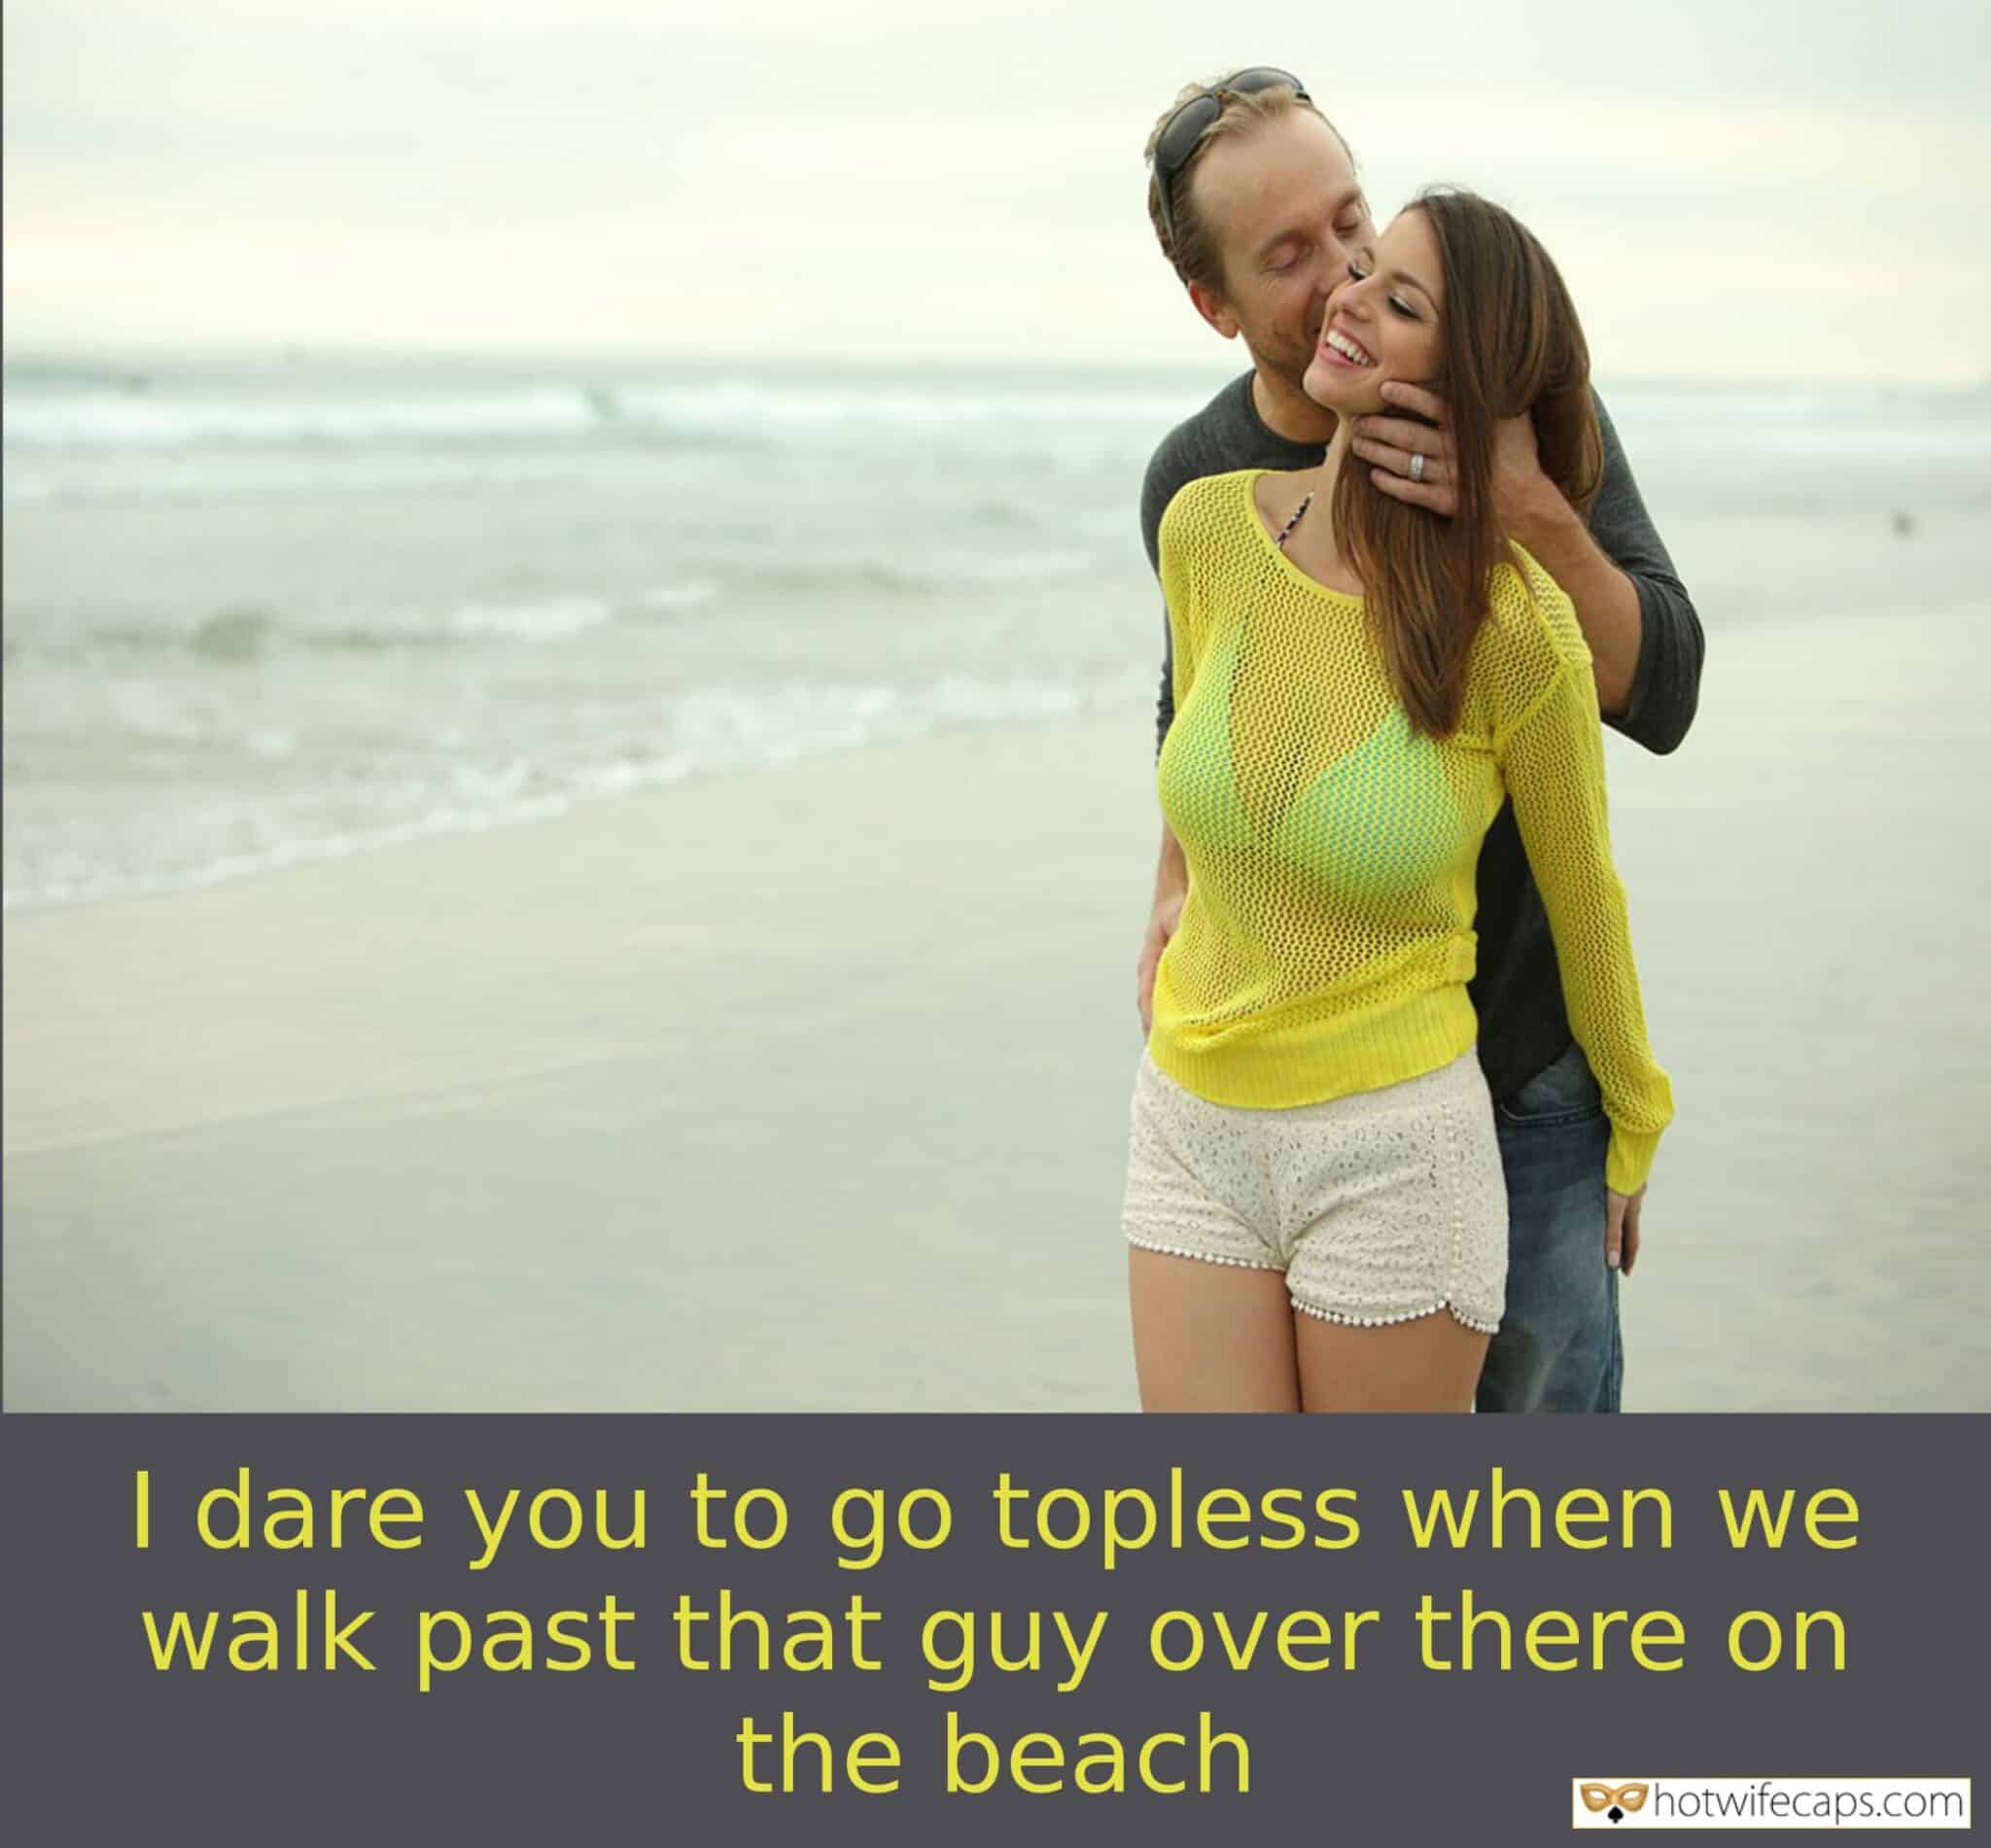 Vacation Sexy Memes  hotwife caption: I dare you to go topless when we walk past that guy over there on the beach She Likes the Idea to Show Boobs to a Stranger